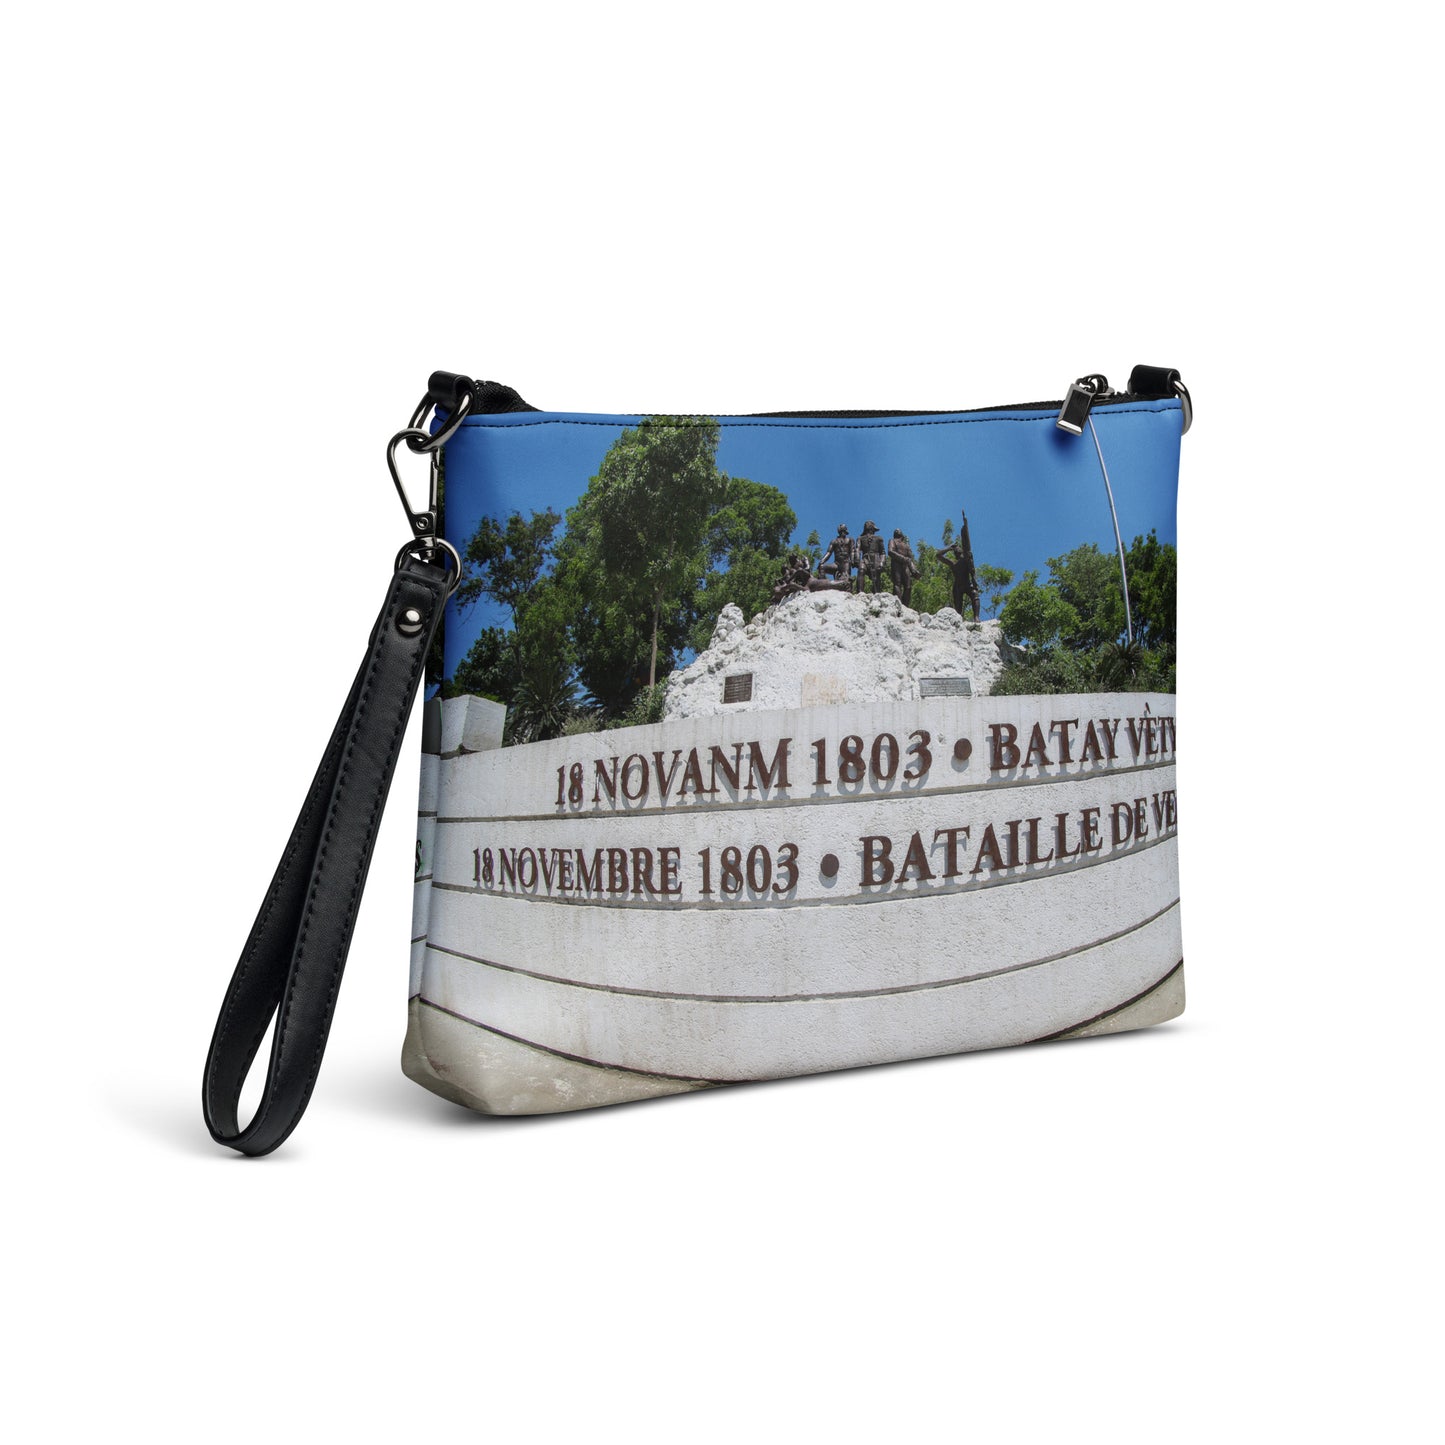 crossbody-crossbodybag-Monument to the heroes of the Battle of Vertières-historical monument-théo gallery expo-théo photography  haiti